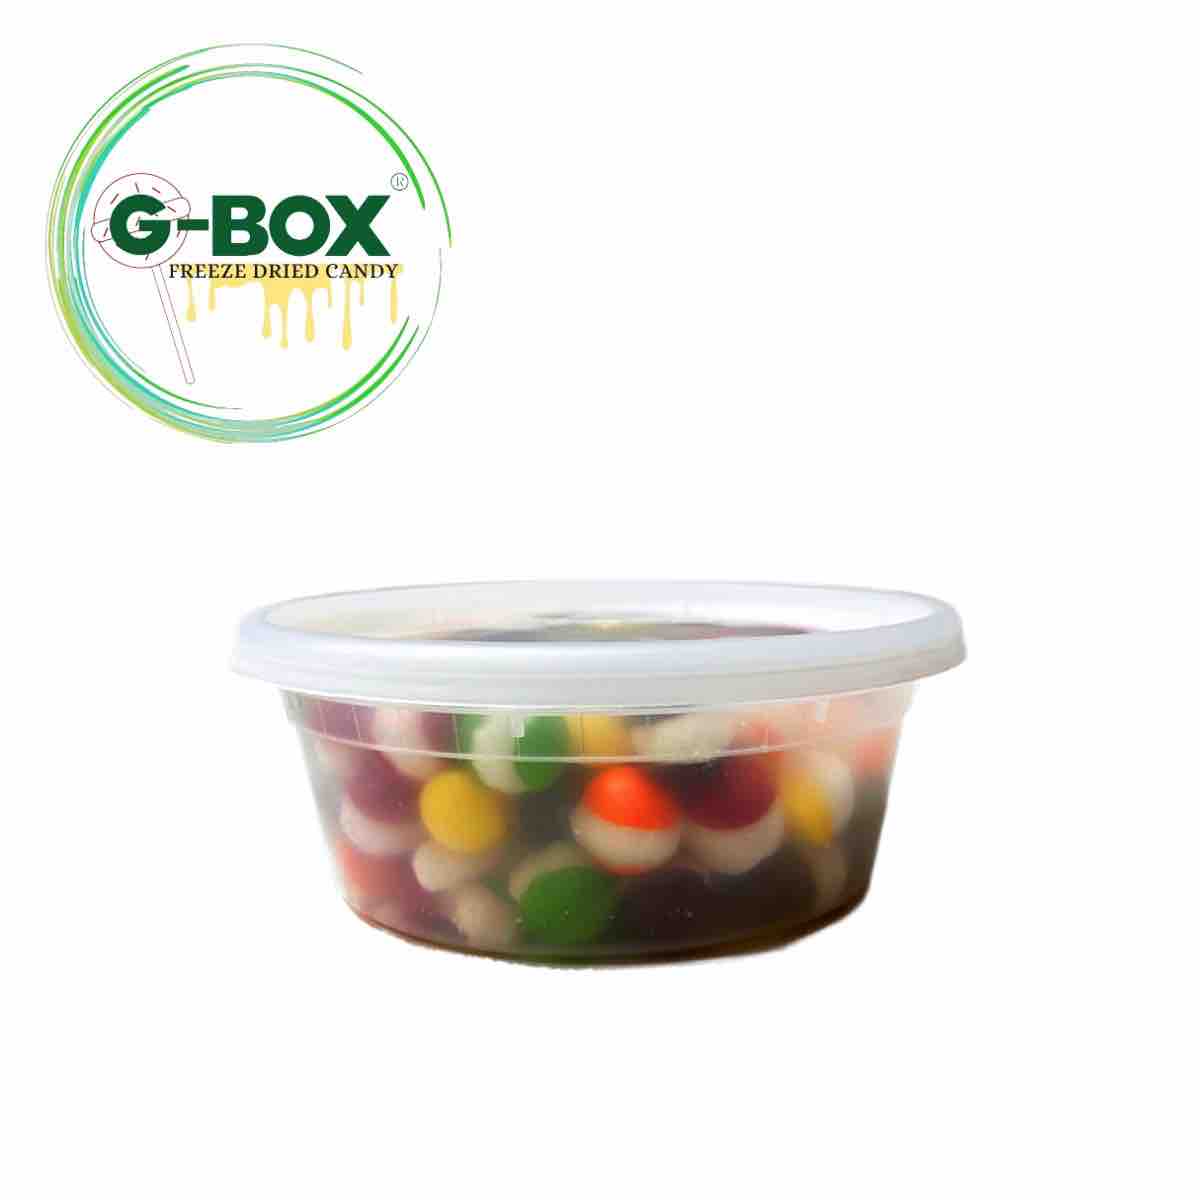 G-Box Freeze Dried Skittles Original Flavor in a Deli Container